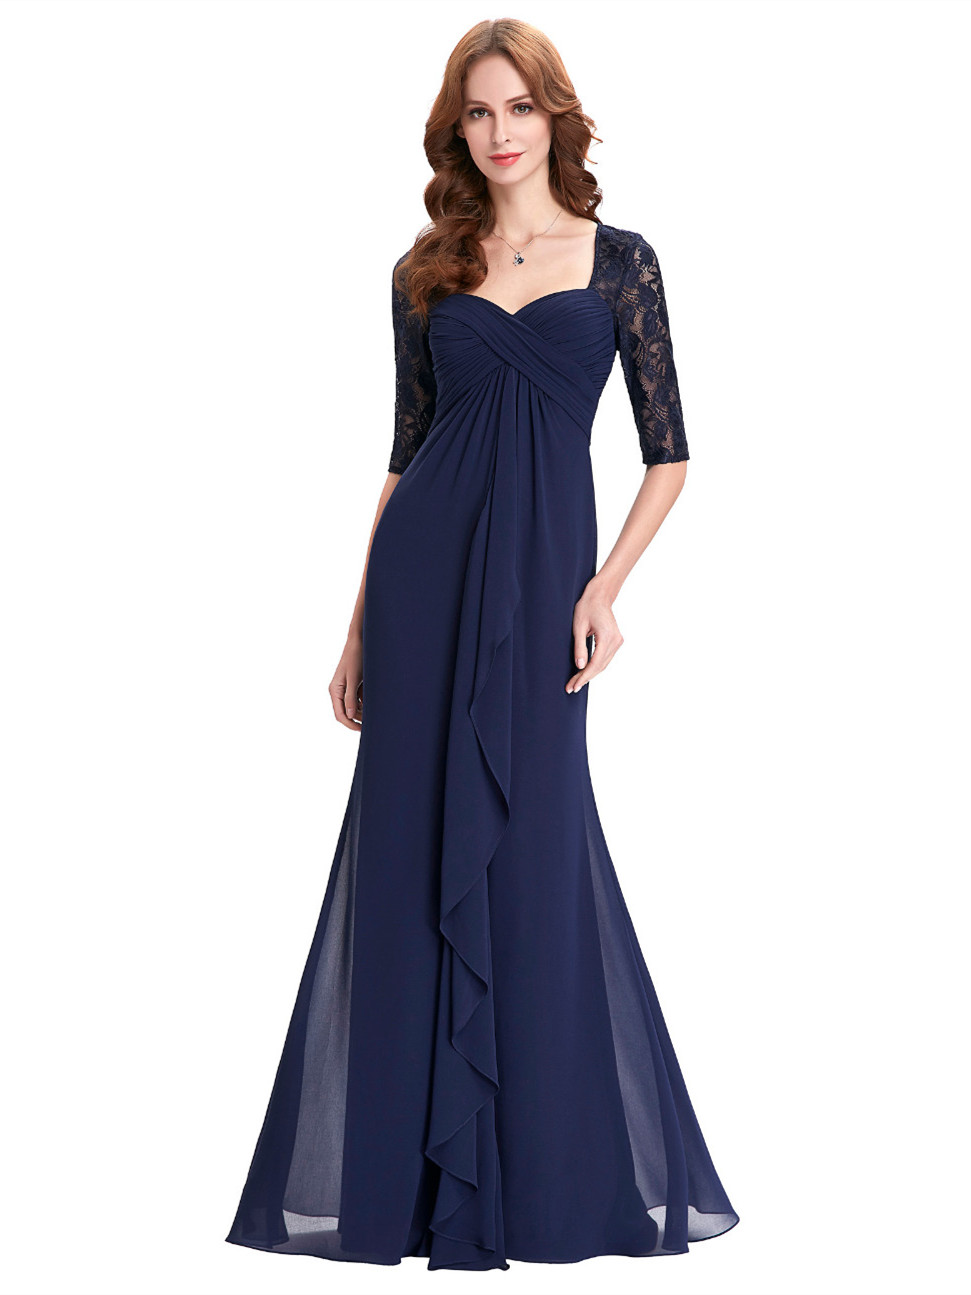 Ericdress Half Sleeves Sheath Long Mother Of The Bride Dress